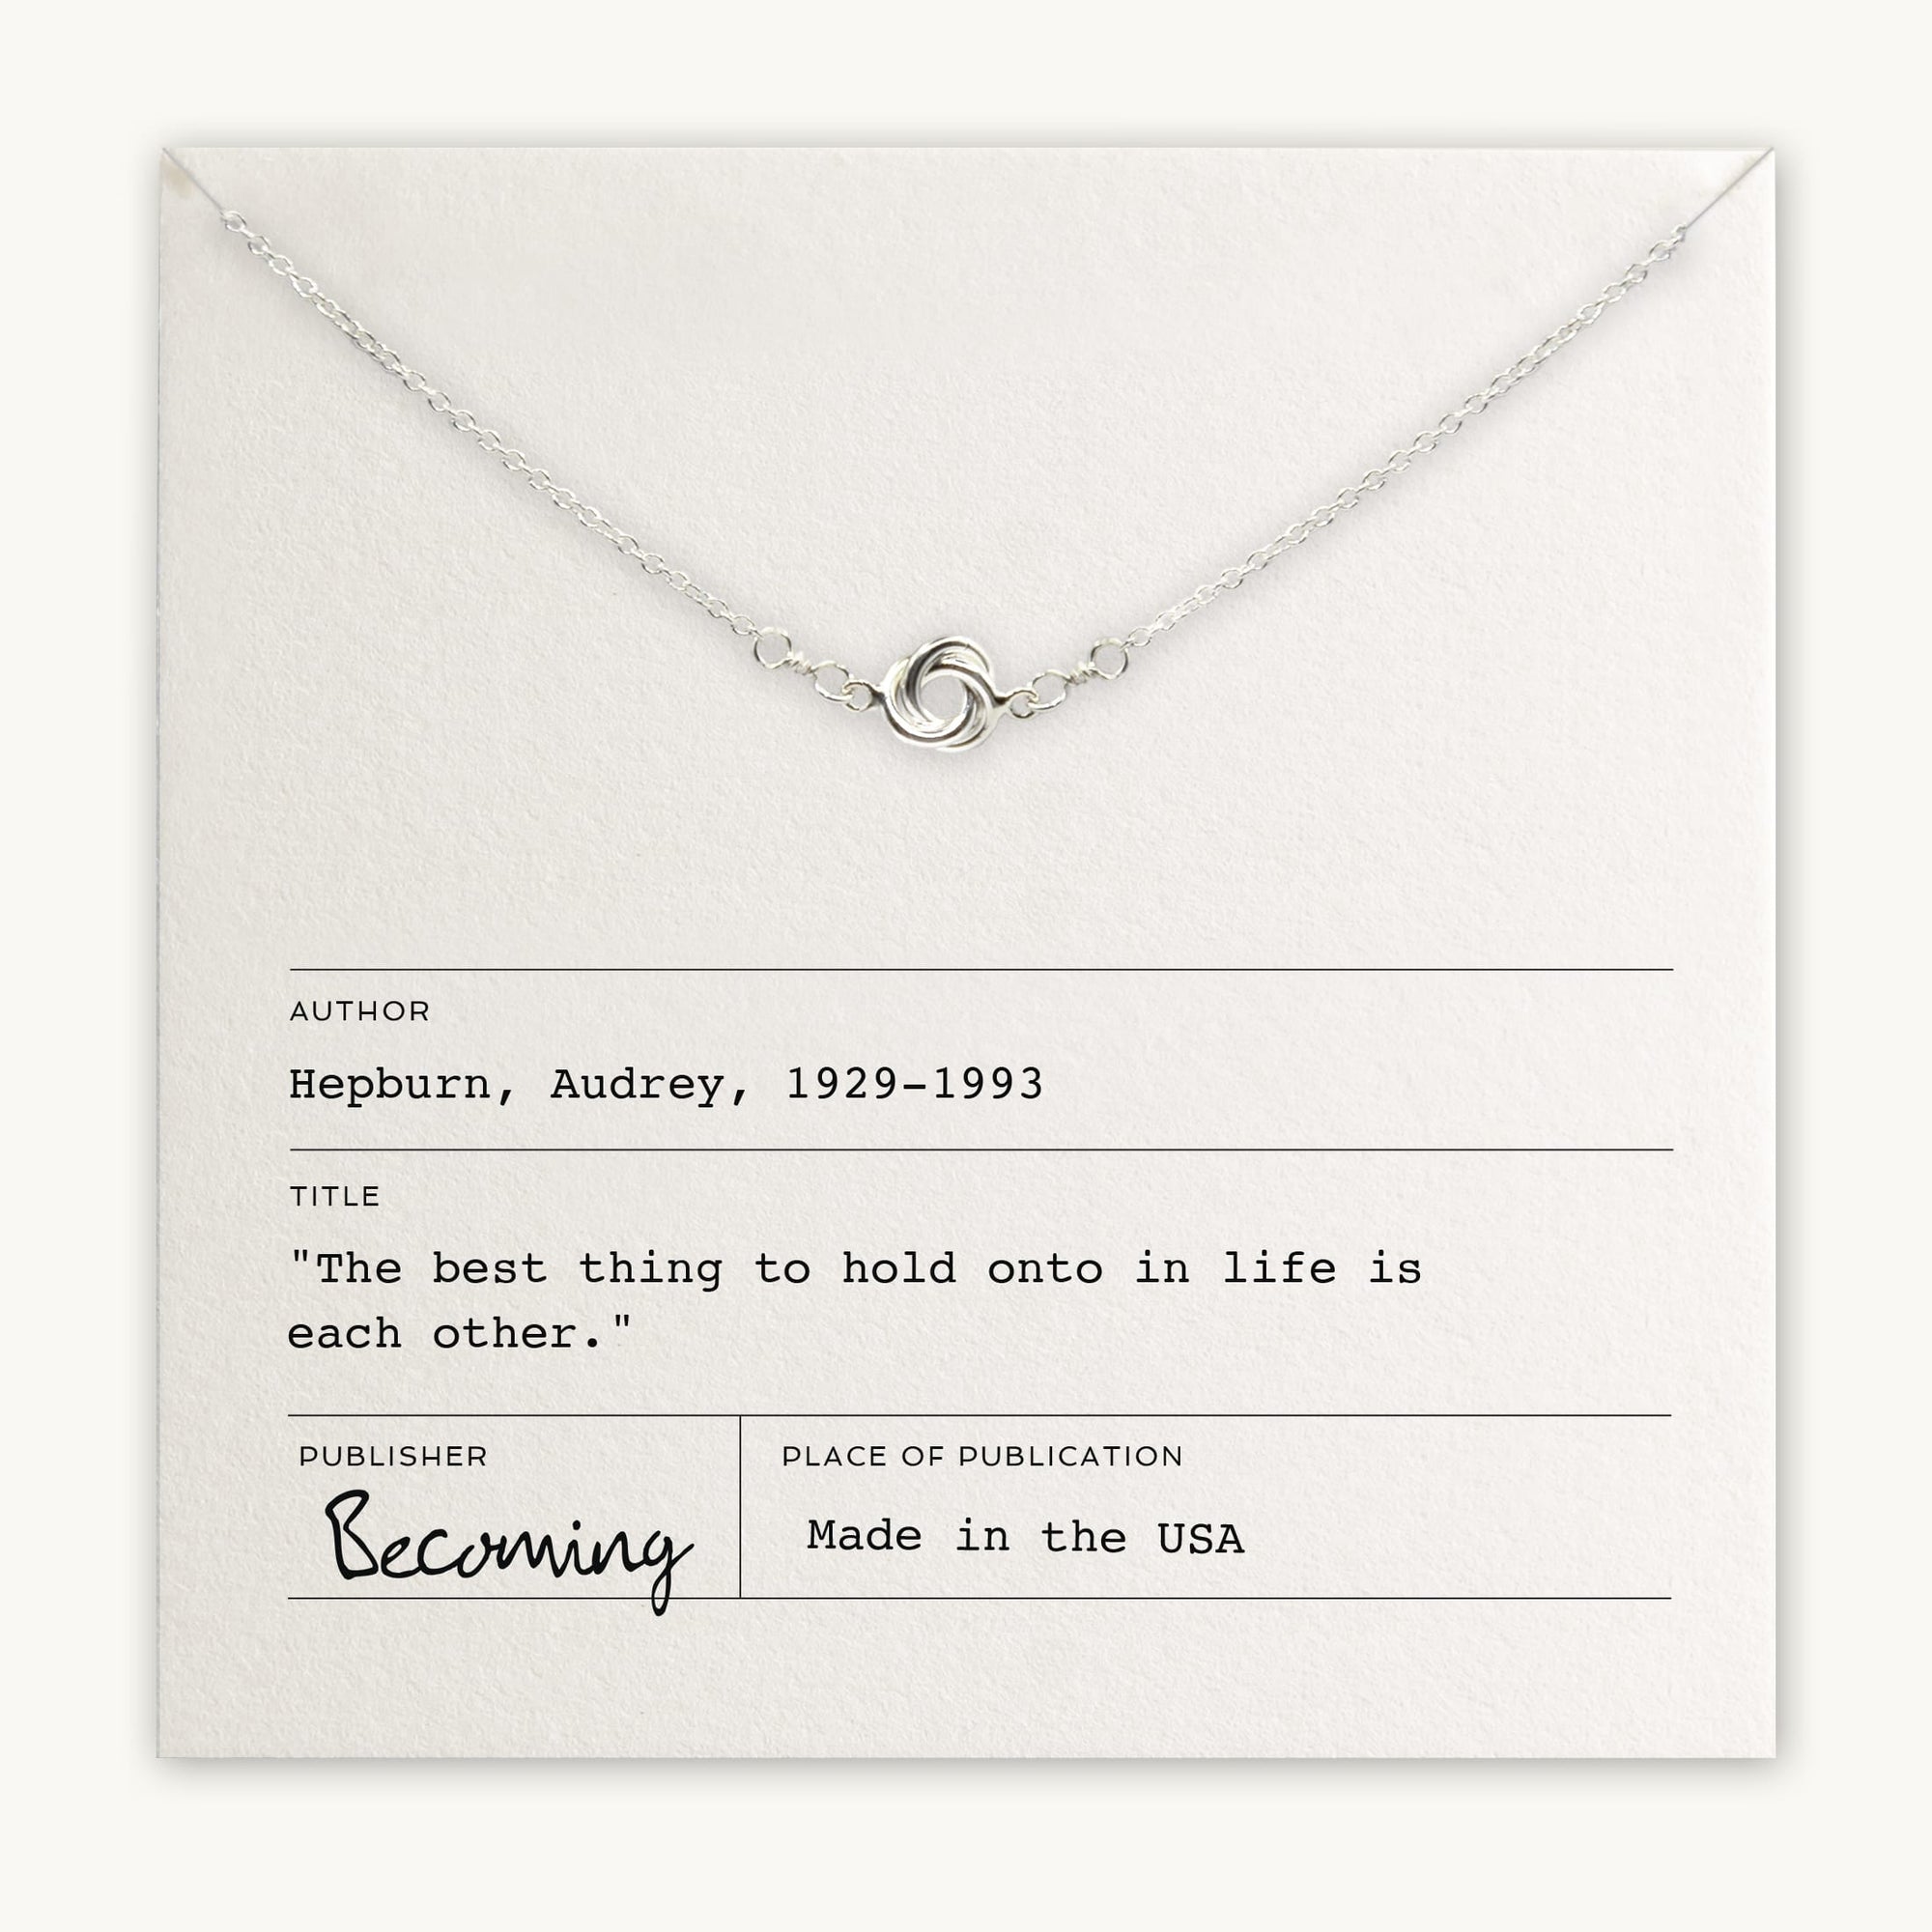 A Love Knot Necklace laid over a card with a quote by Audrey Hepburn, titled &quot;Becoming,&quot; made in the USA by Becoming Jewelry.